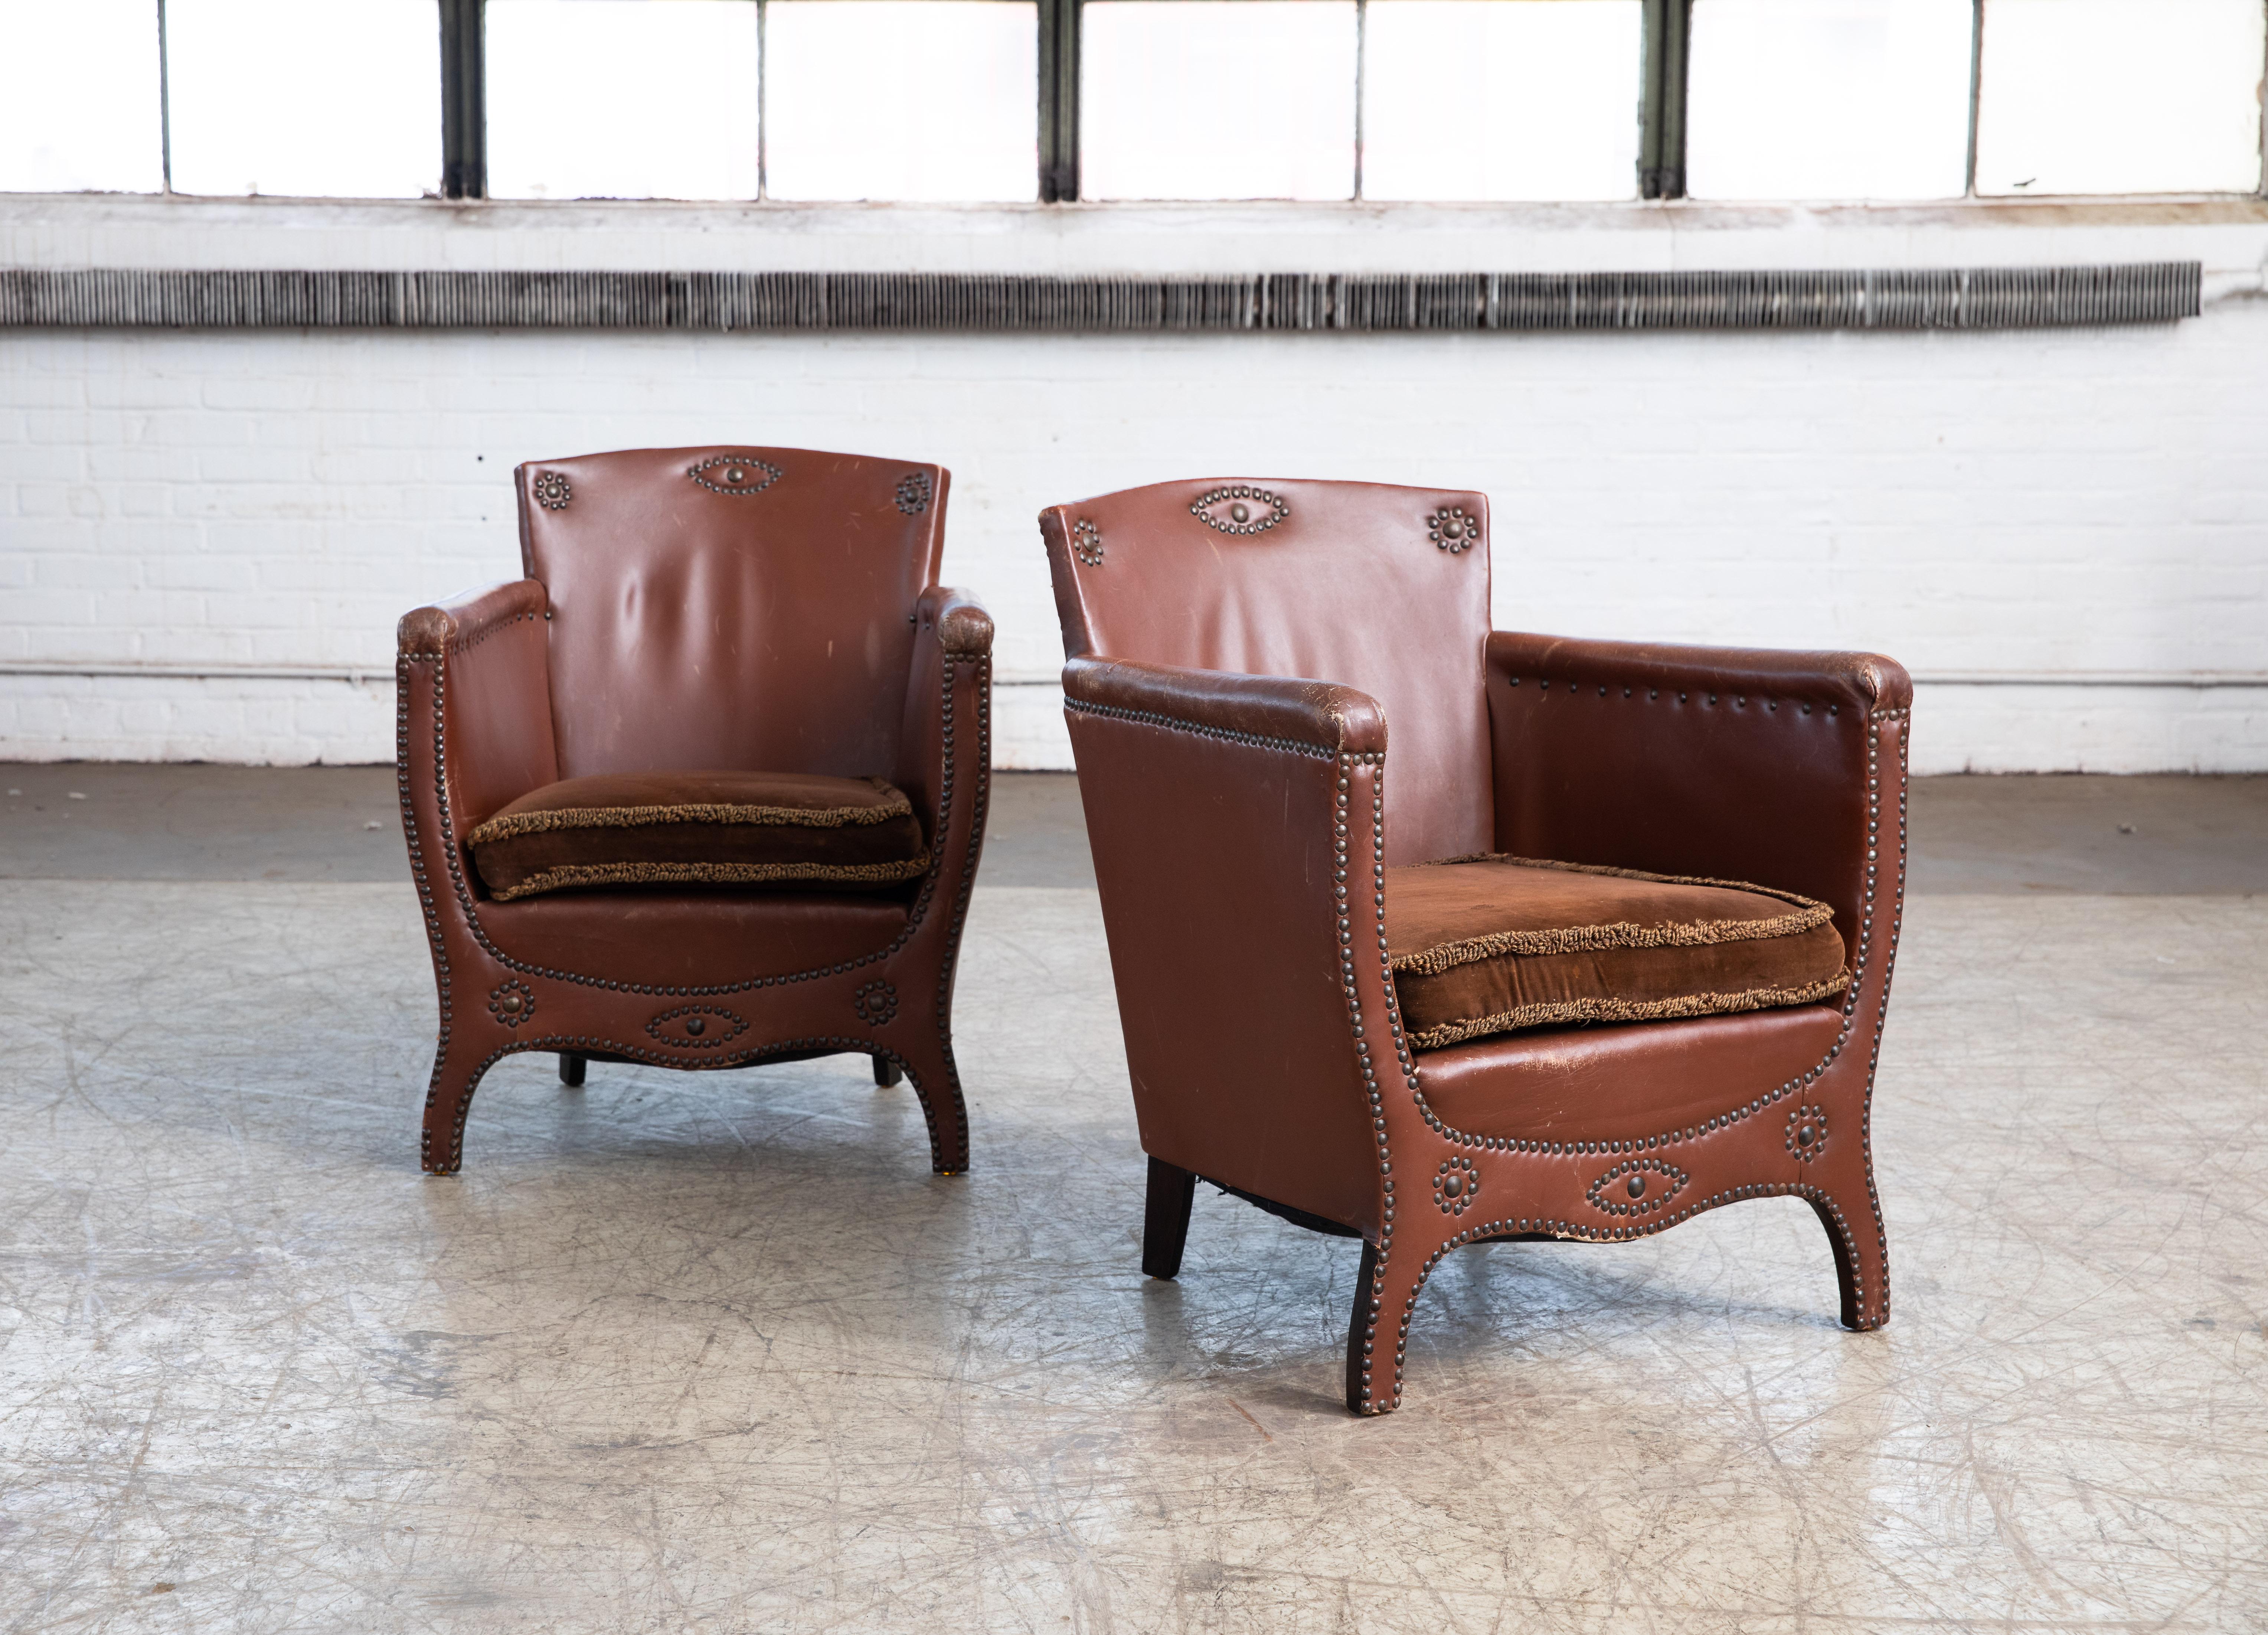 Superb 1930s-1940s baroque-style lounge chair by Otto Schulz designed for Boet - Schulz' own high-end retail store in Gothenburg, Sweden. The chairs in leather and birch wood is very representative of his innovative low swung baroque designs that